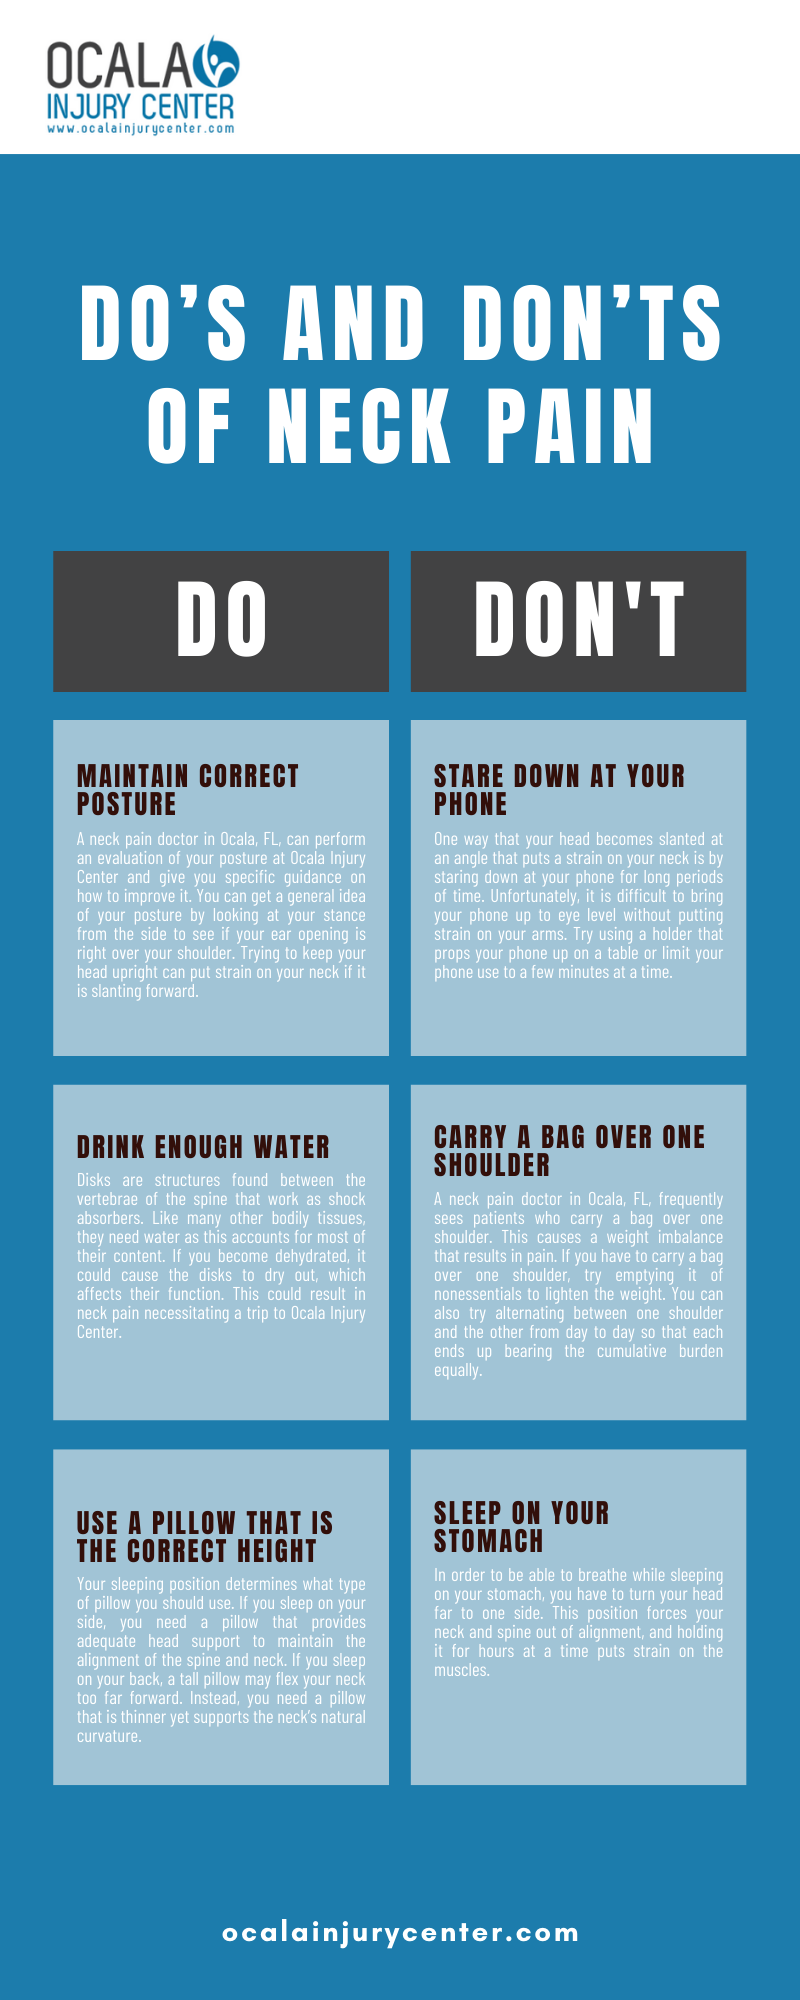 DO'S AND DON'TS OF NECK PAIN INFOGRAPHIC